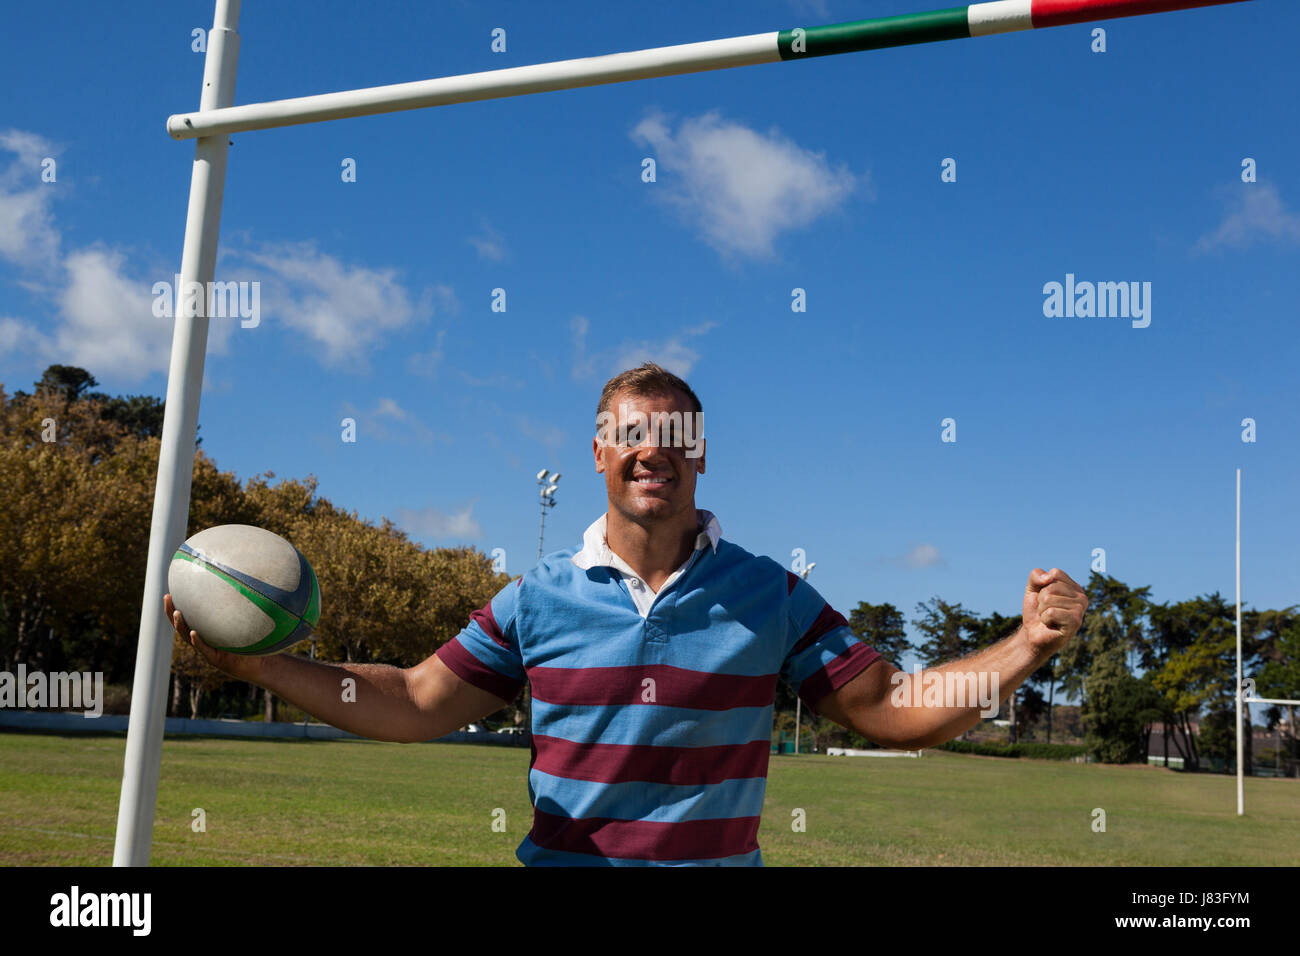 Portrait of happy rugby player holding ball by goal post against blue sky Stock Photo